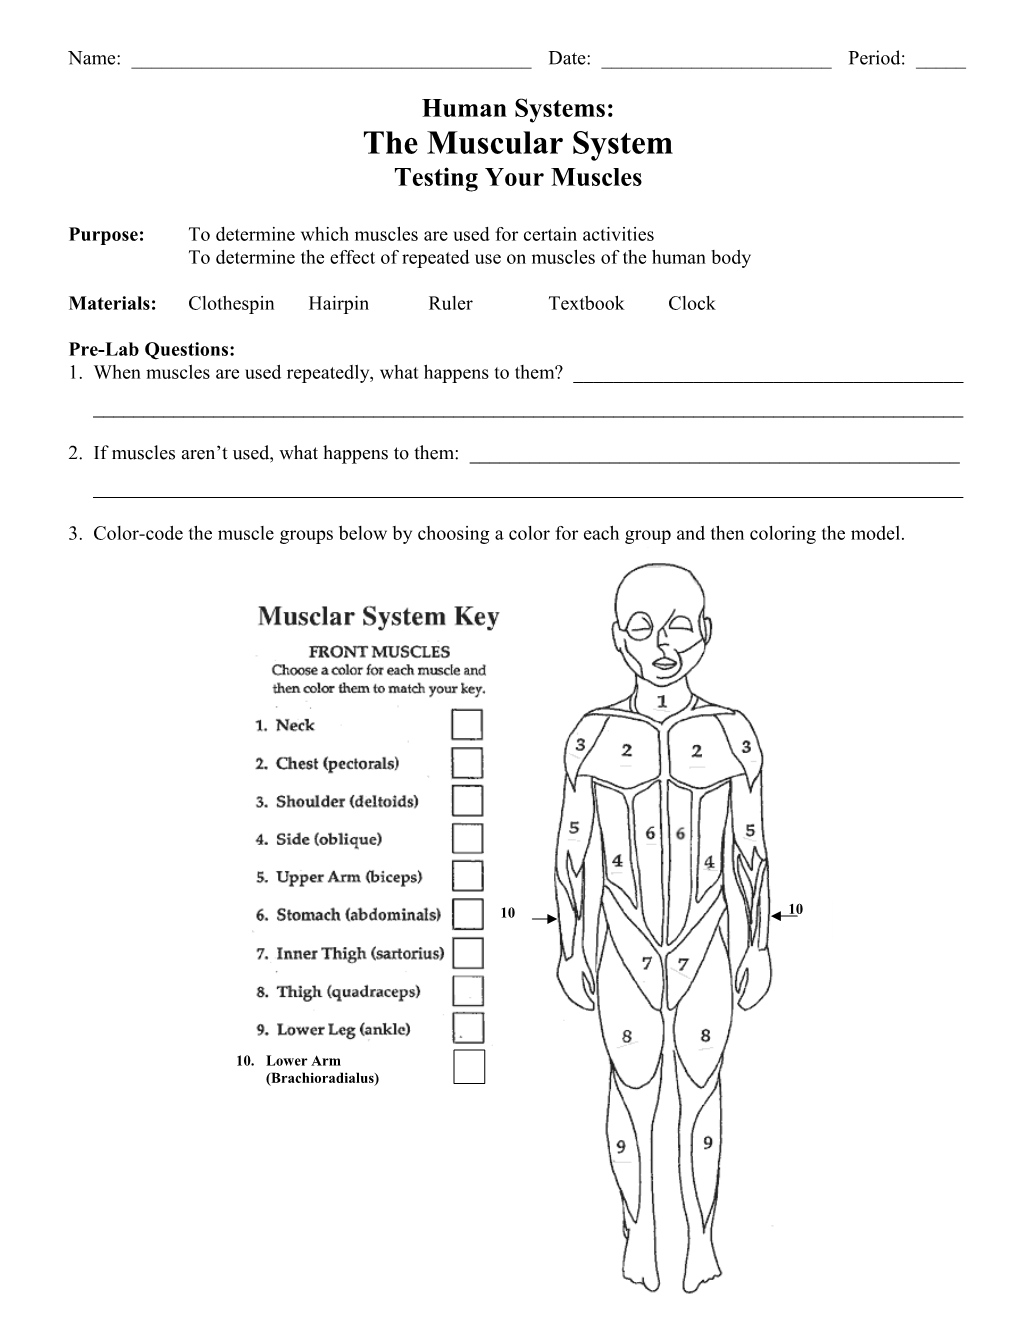 The Muscular System s1